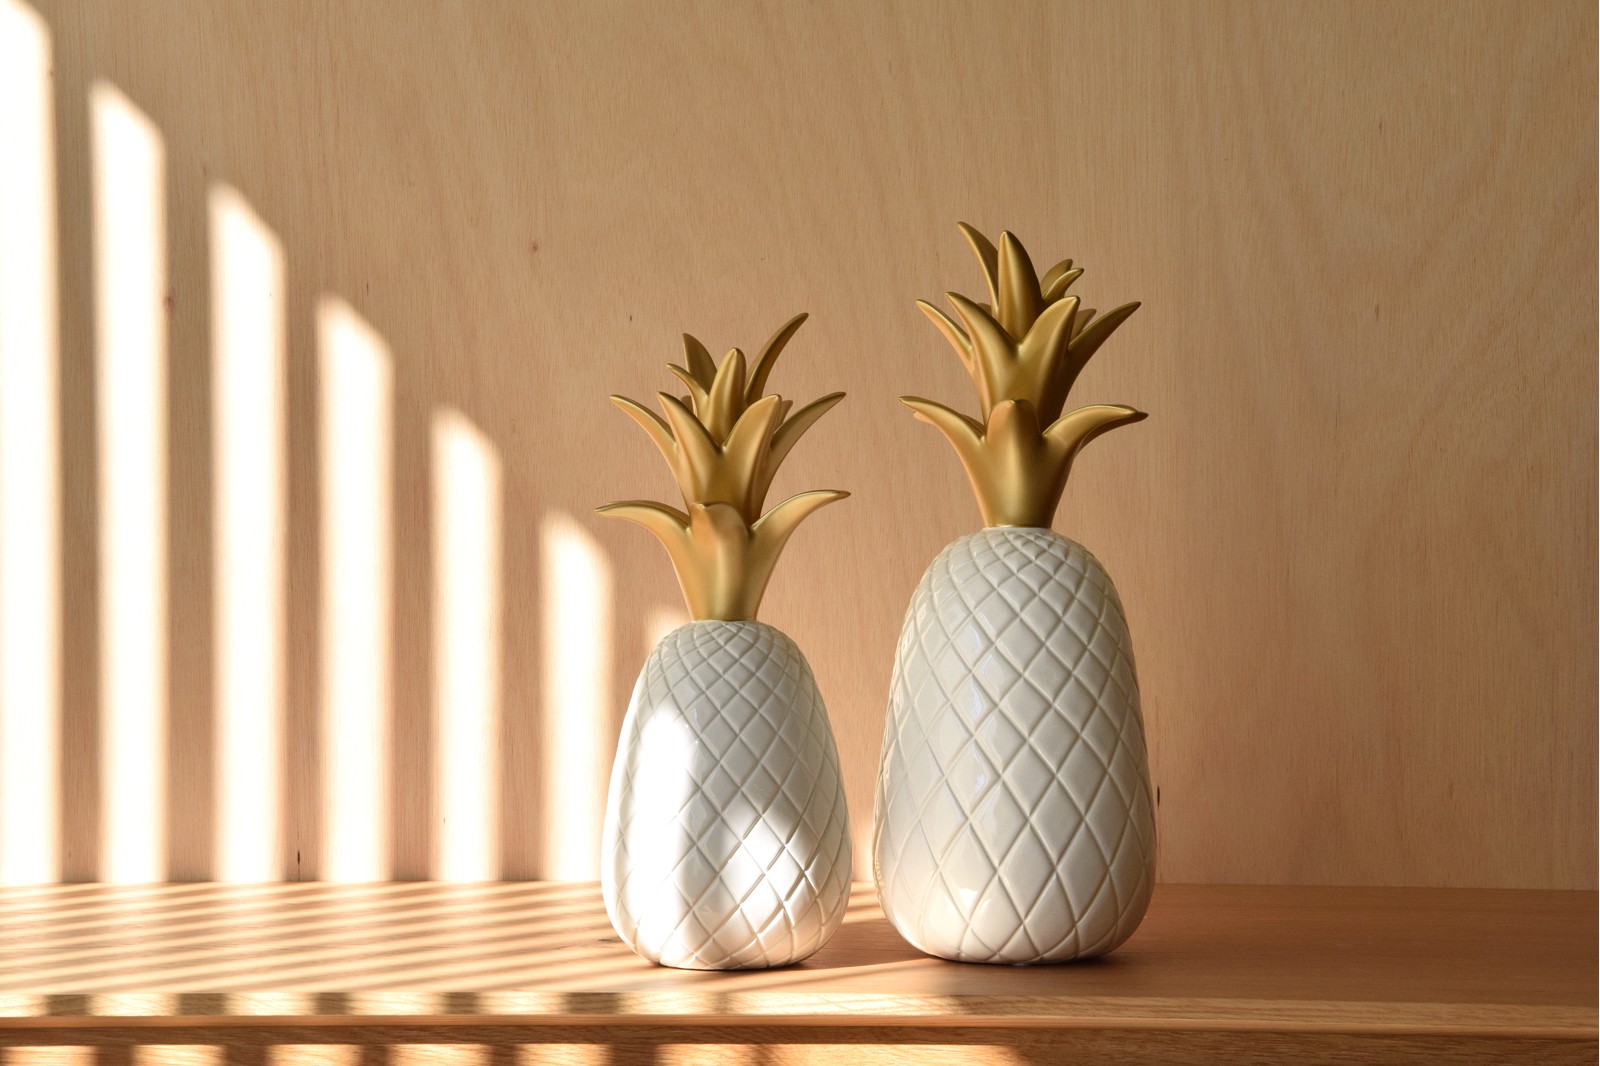 PINEAPPLE COLLECTION. WHITE GOLD CERAMIC SCULPTURE